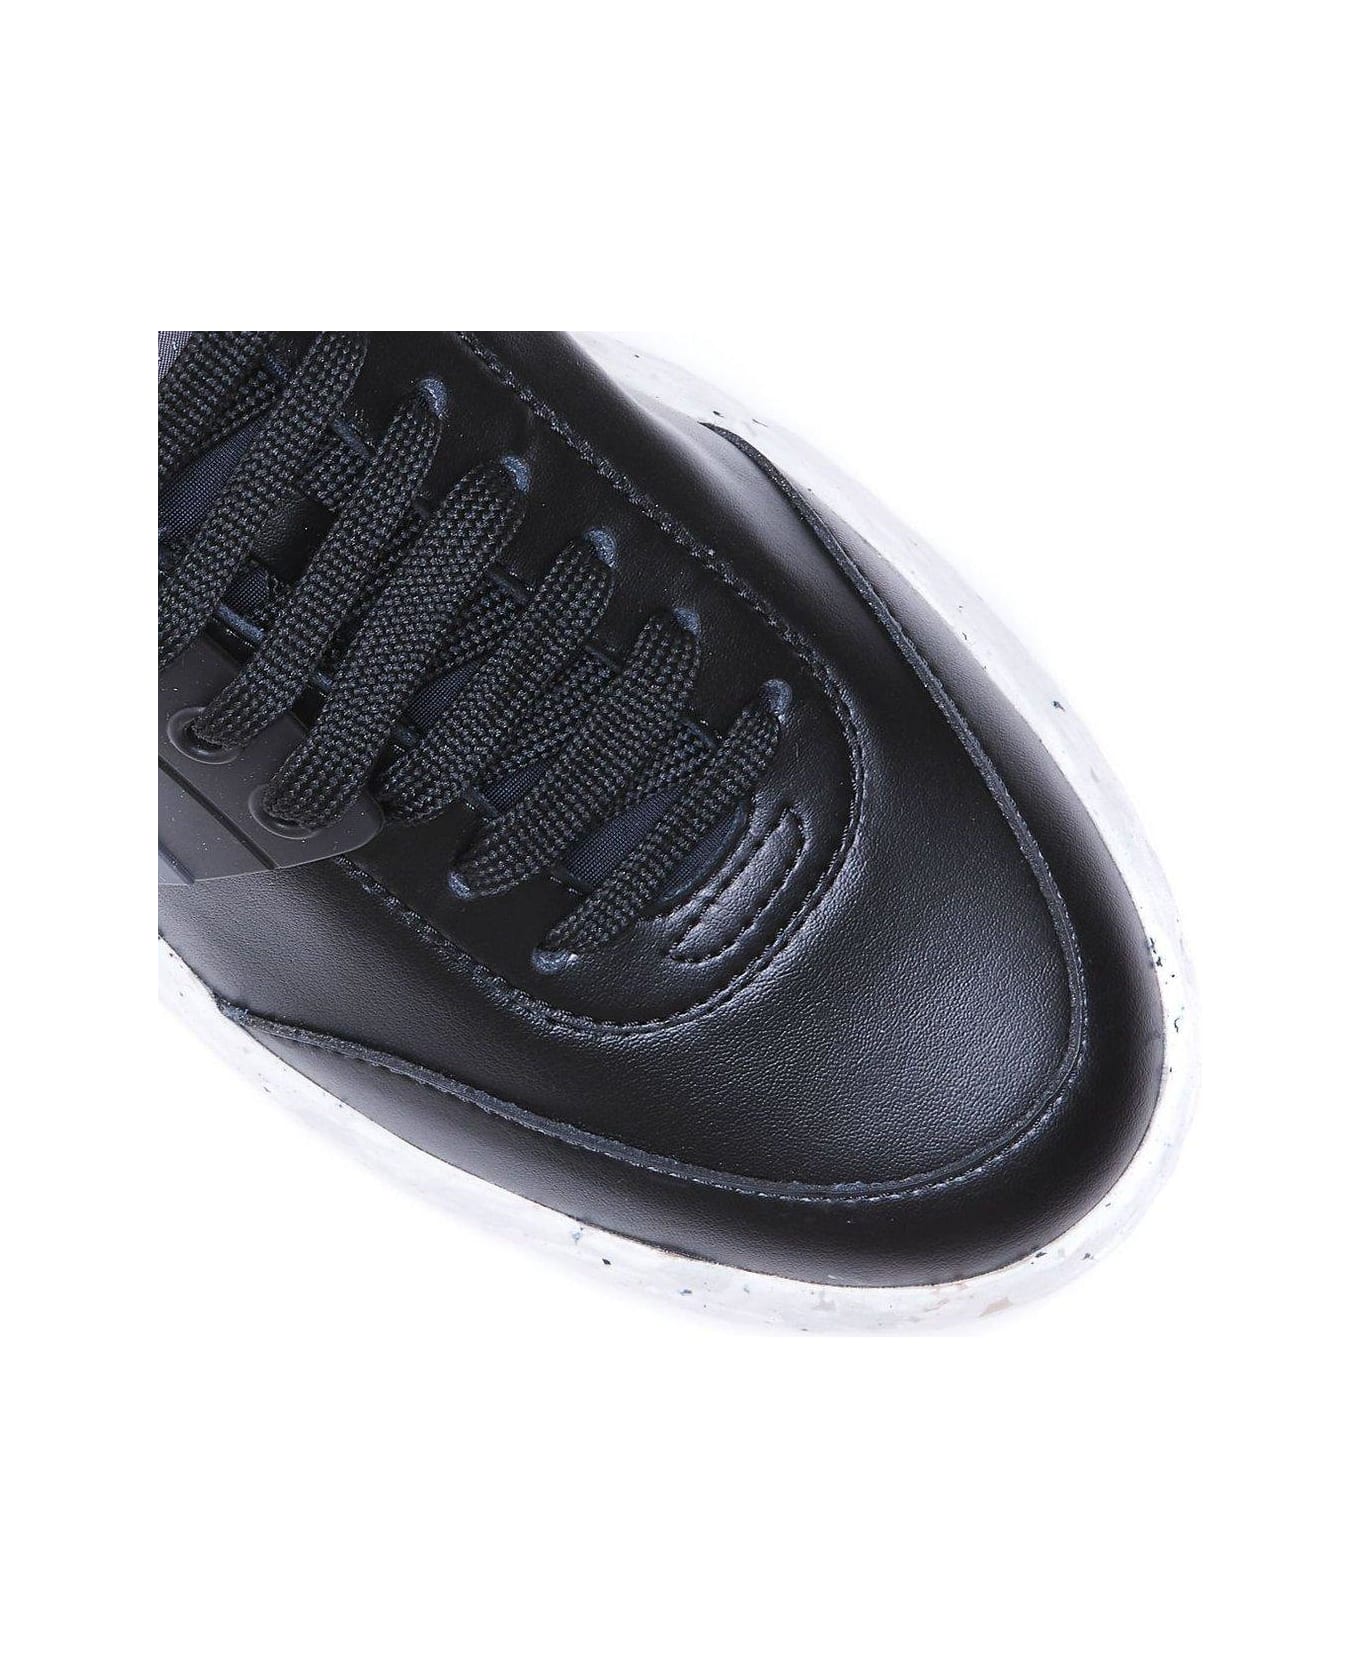 Hogan 3r Lace-up Sneakers スニーカー